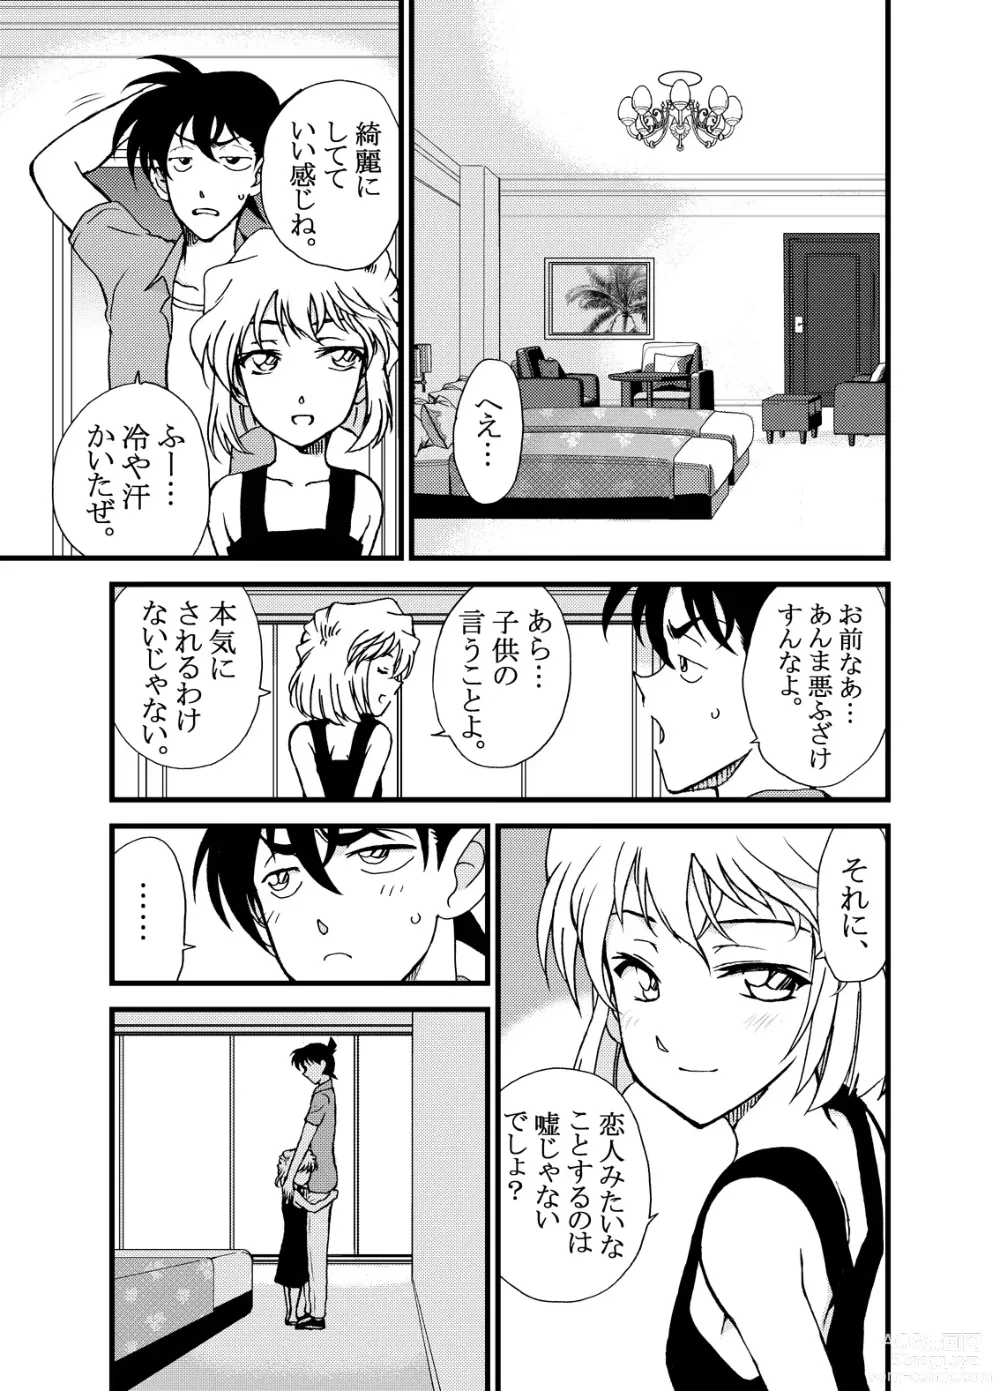 Page 6 of doujinshi Summer Resort Preview